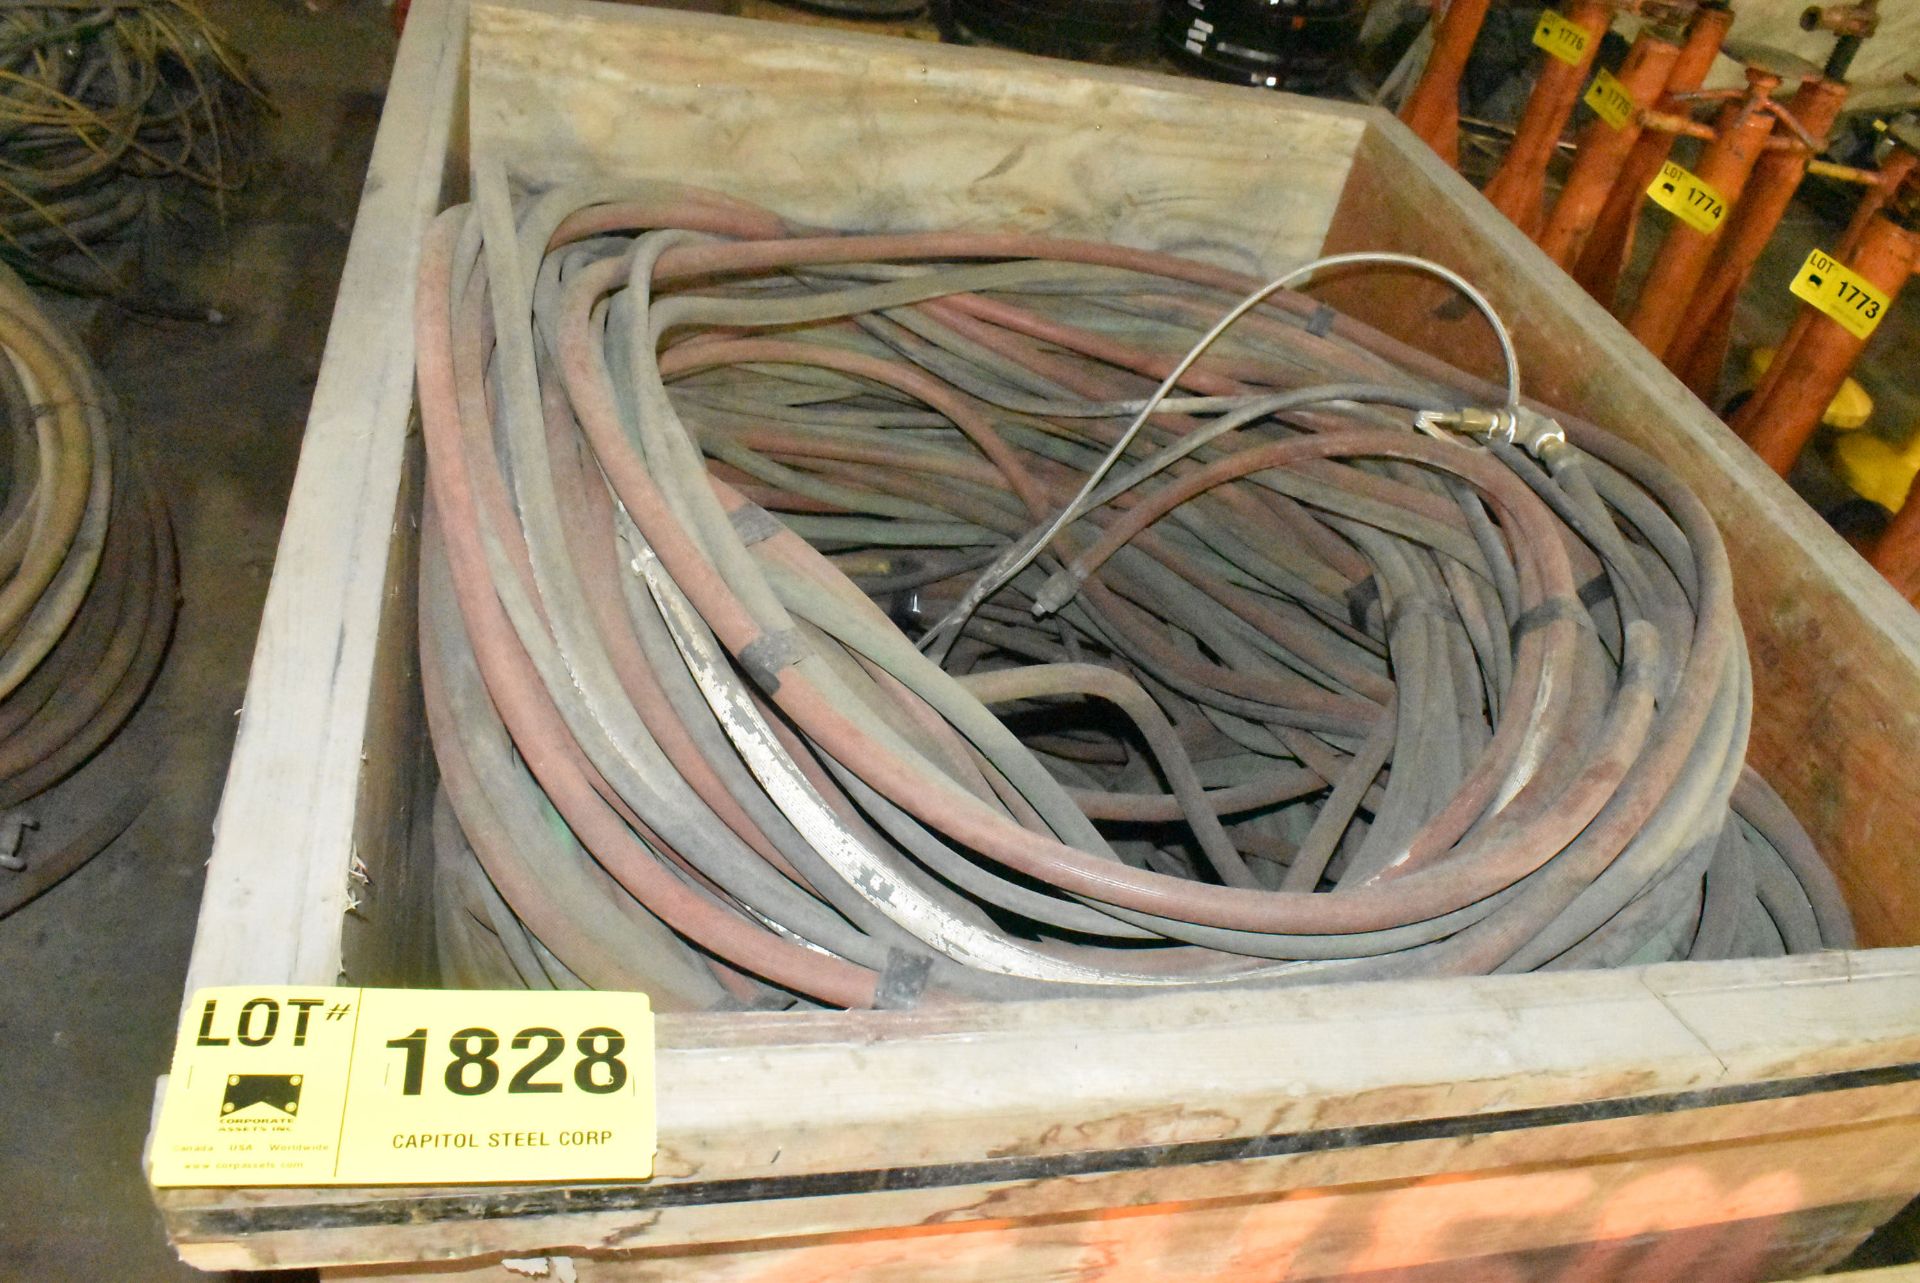 LOT/ OXY-ACETYLENE WELDING HOSE [RIGGING FEES FOR LOT #1828 - $30 USD PLUS APPLICABLE TAXES]